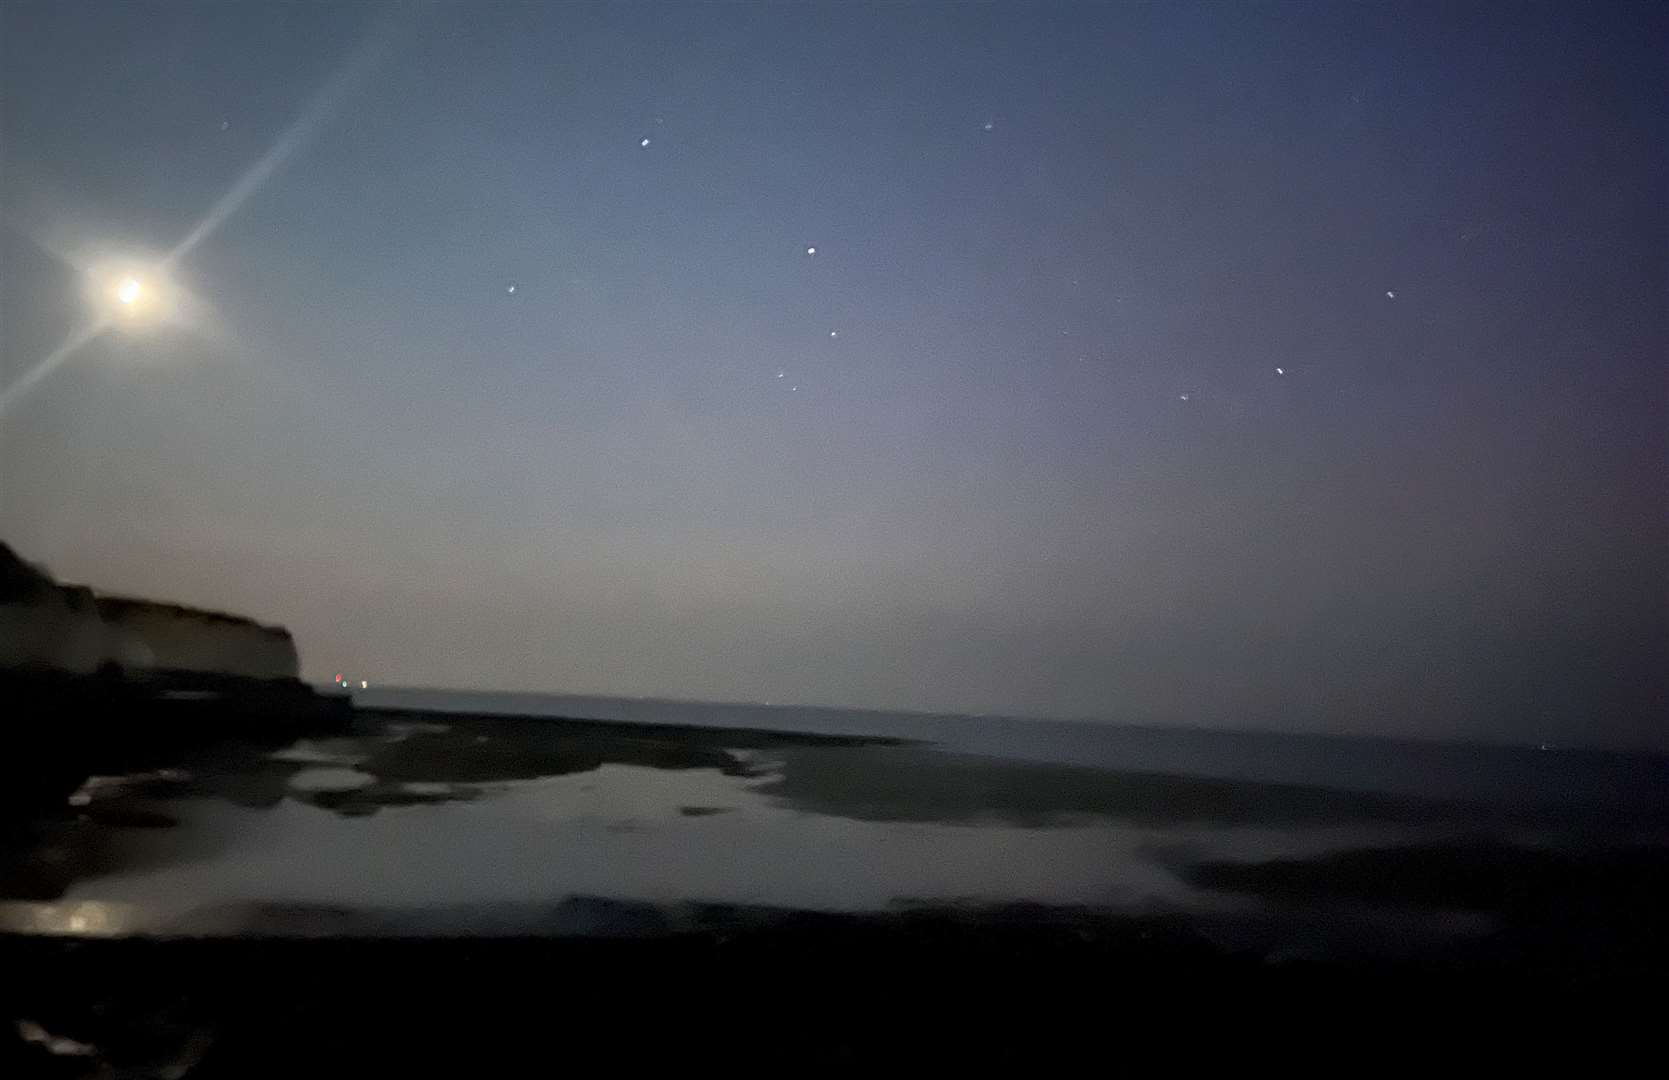 Given it was pitch black, I was impressed with this Thanet coastal shot I took on long-exposure. There is, however, a distinct lack of the Aurora Borealis